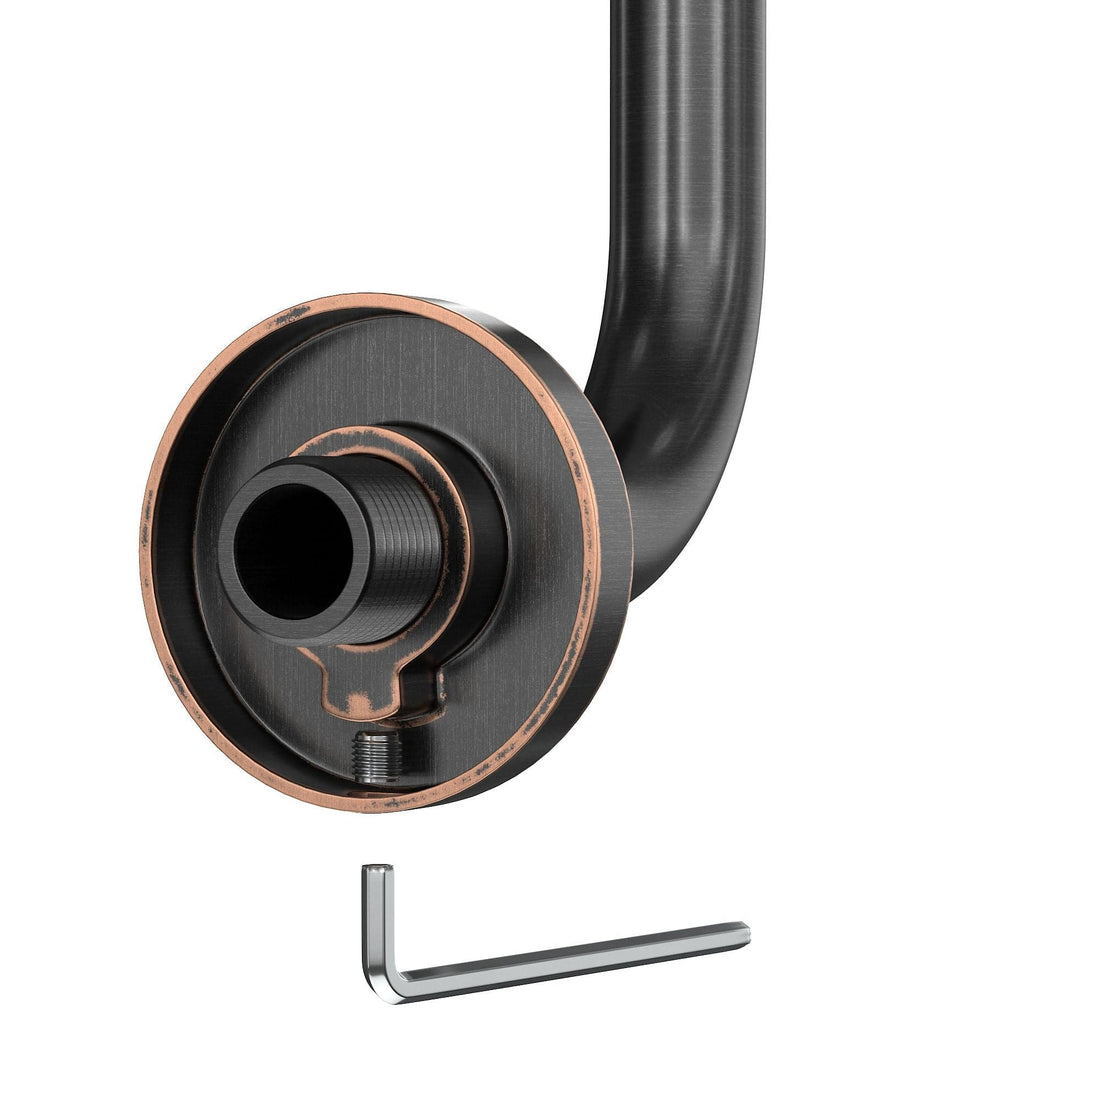 Installation S-Style Arm Oil Rubbed Bronze / 2.5 - The Shower Head Store